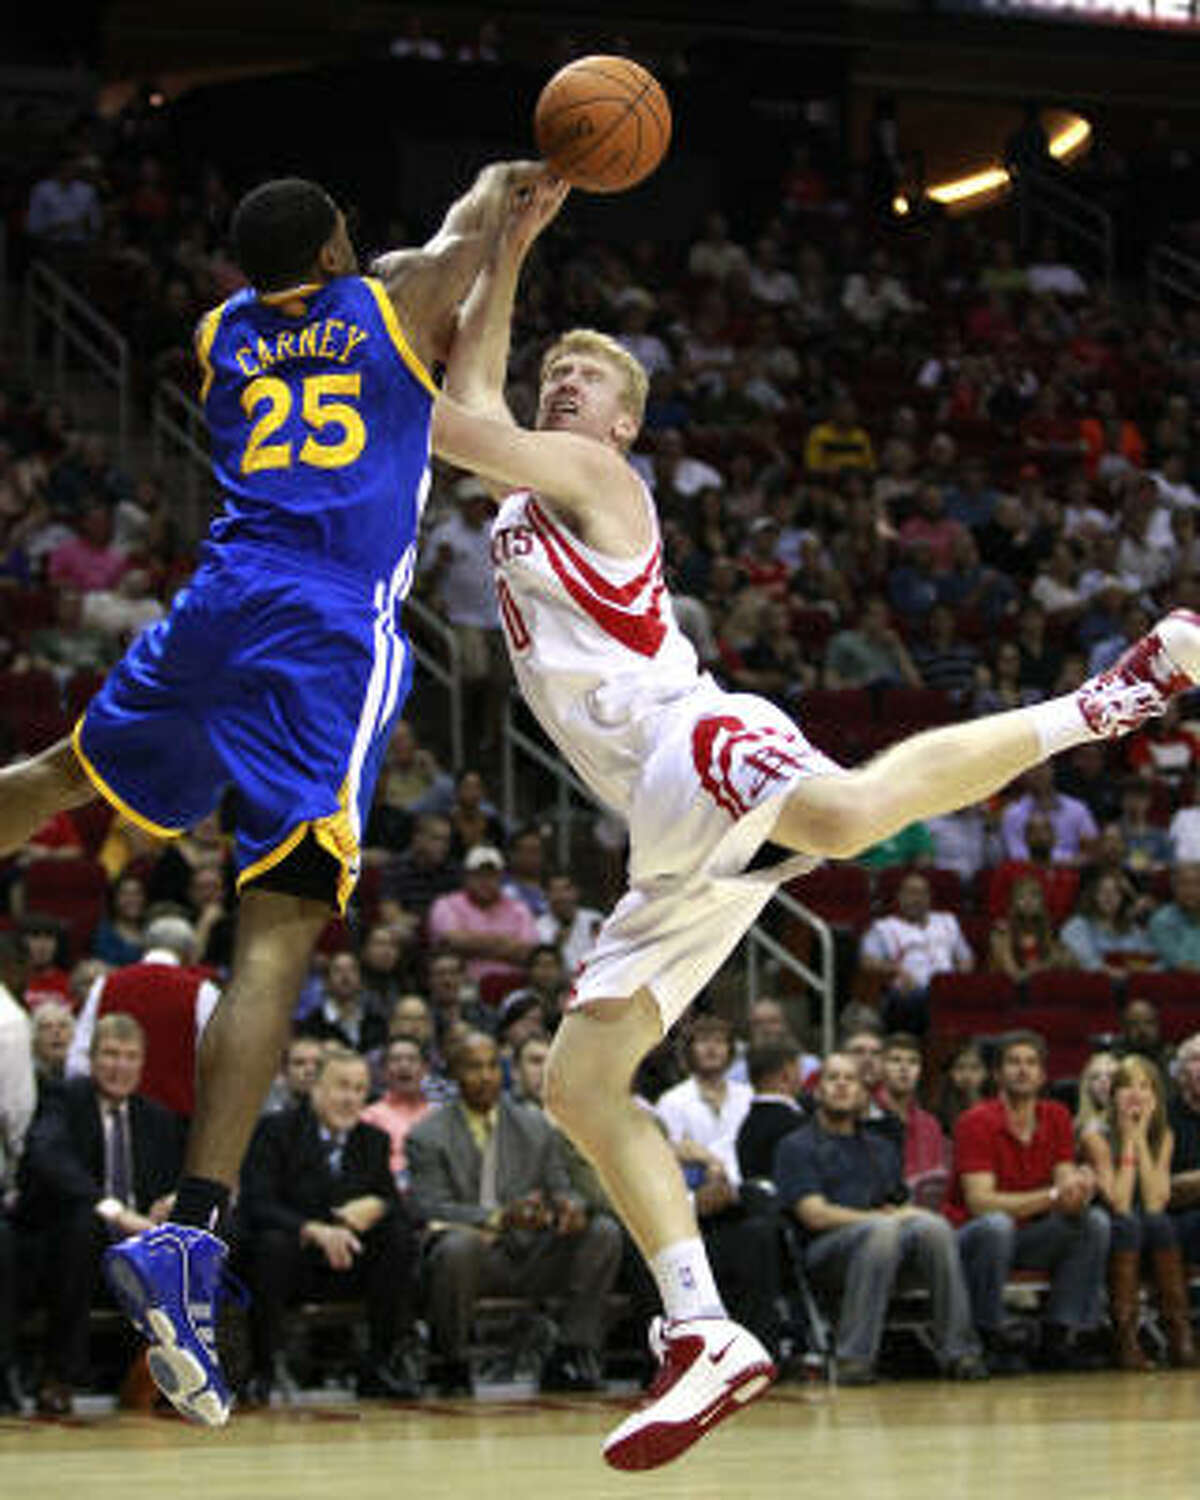 Warriors forward Rodney Carney (25) fouls Rockets forward Chase Budinger during the first half.